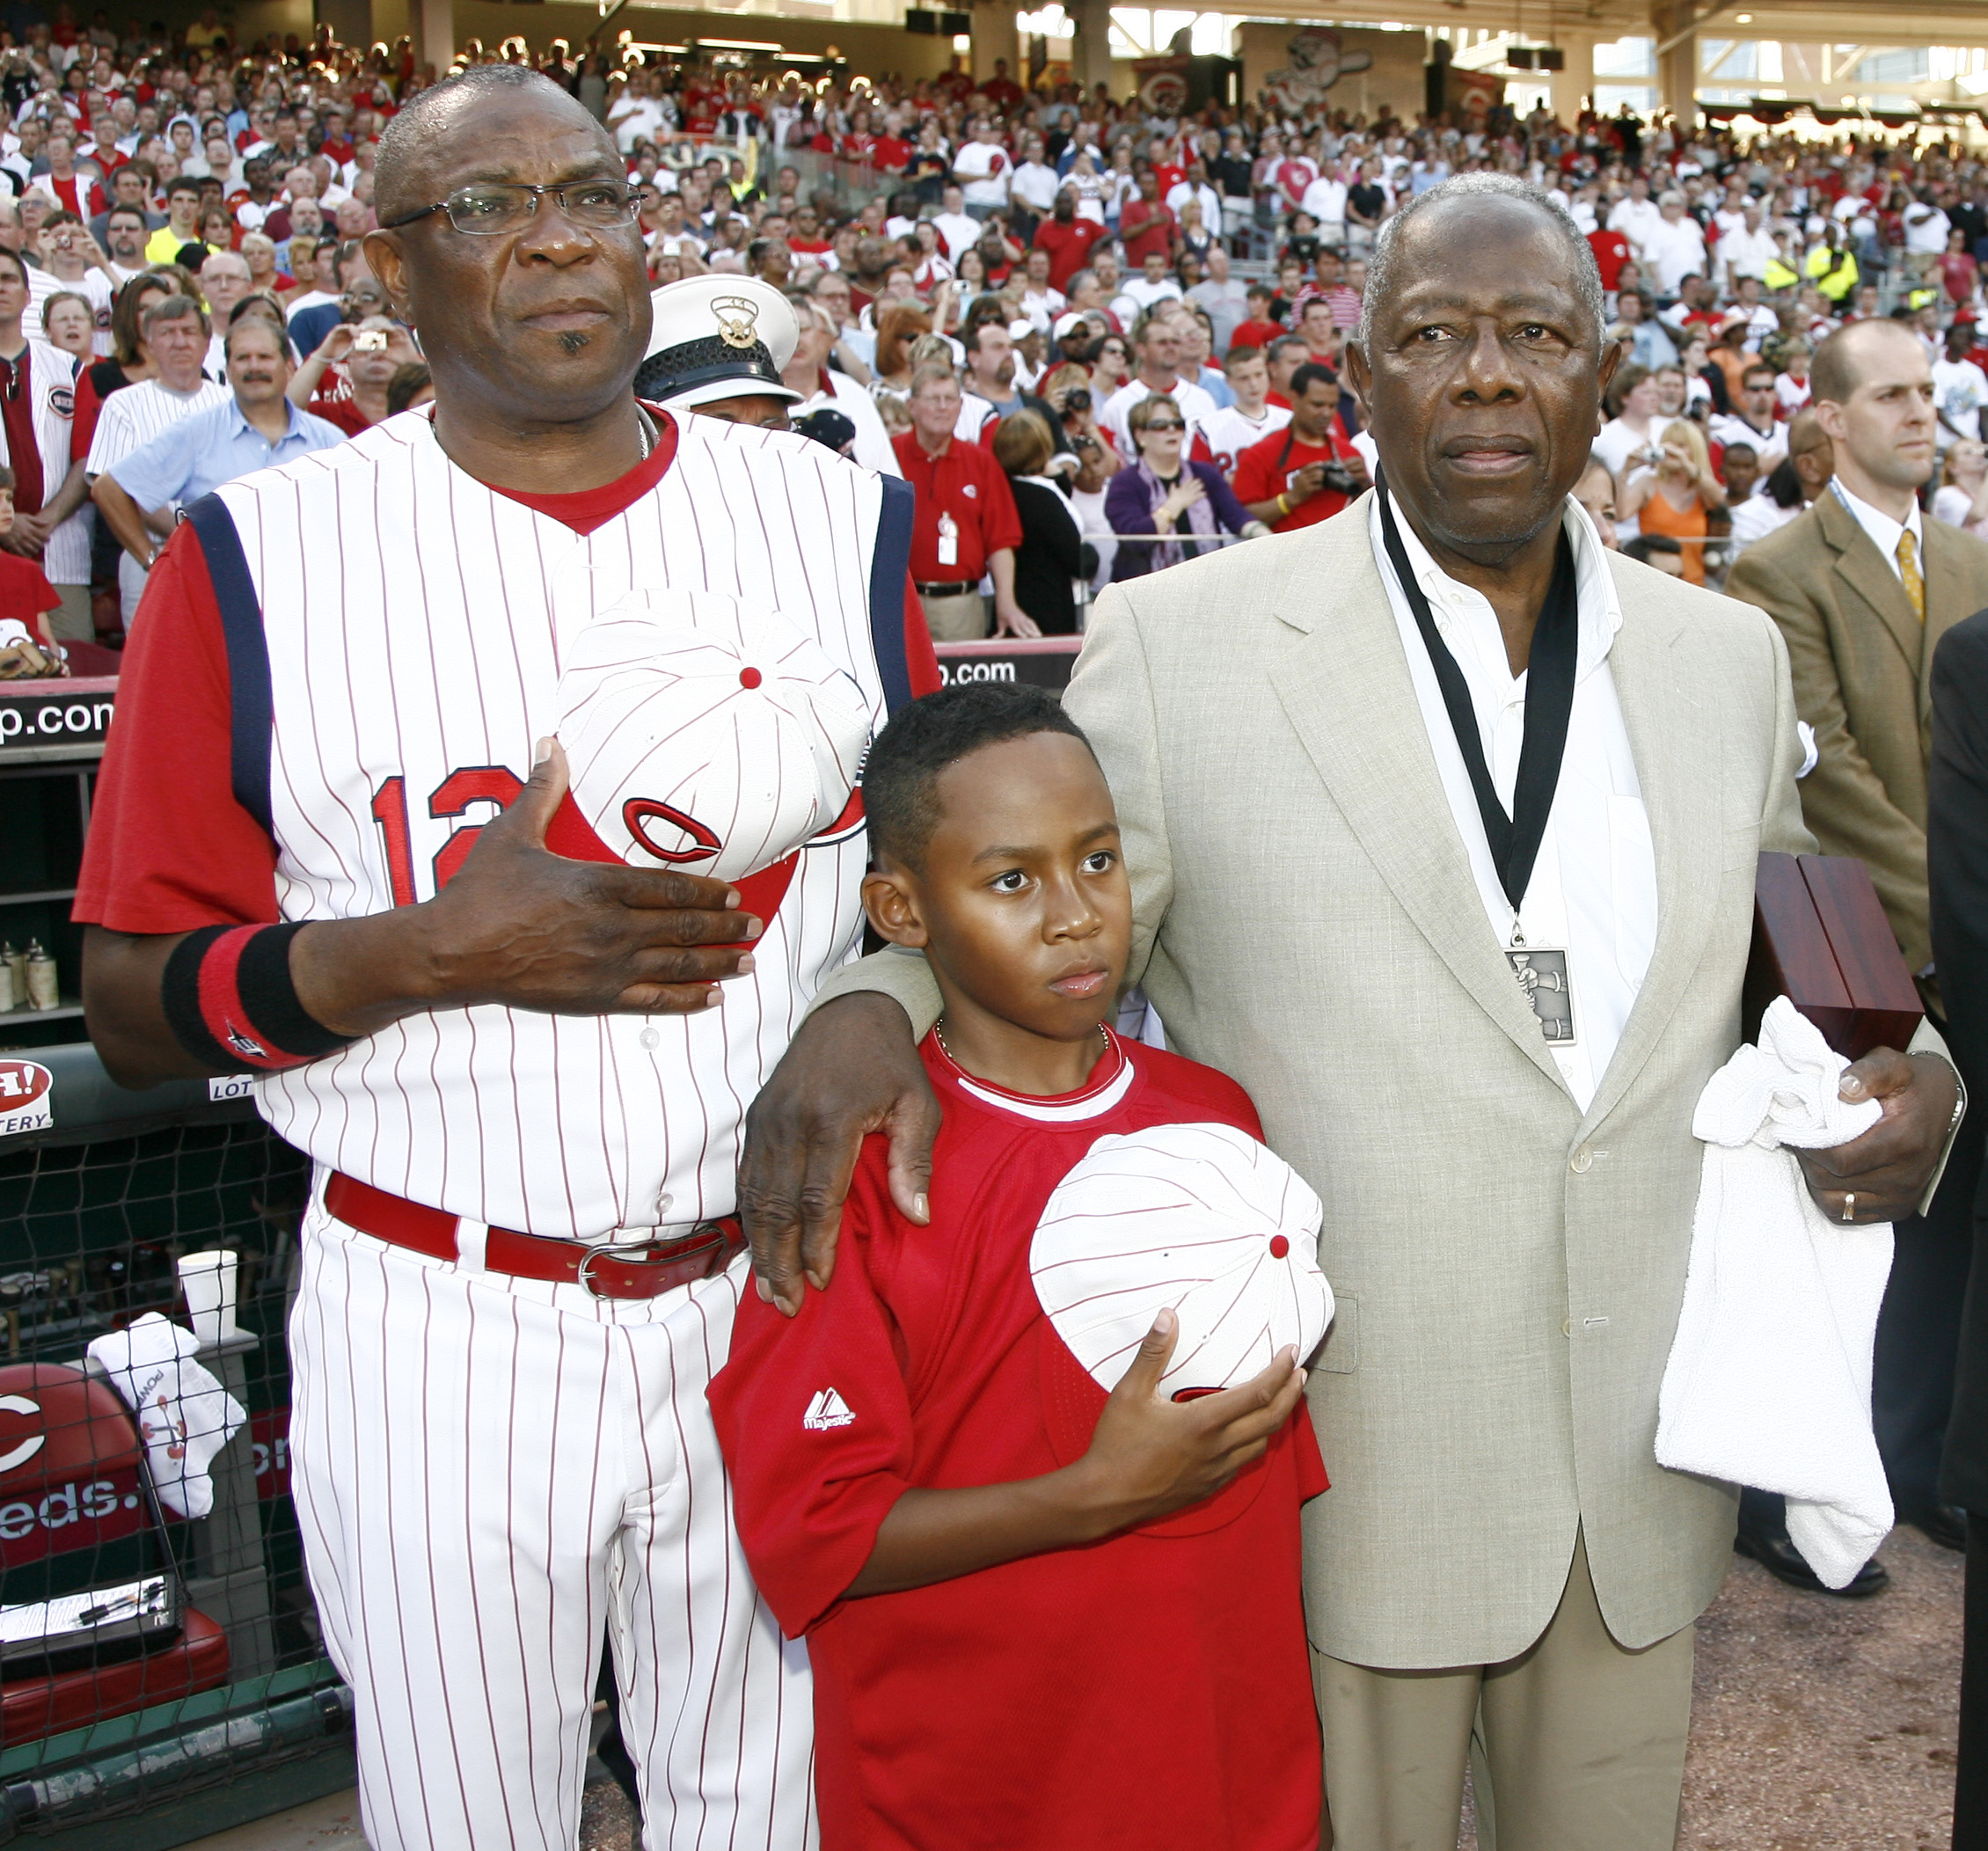 Dusty Baker remembers Hank Aaron during Braves/Astros World Series